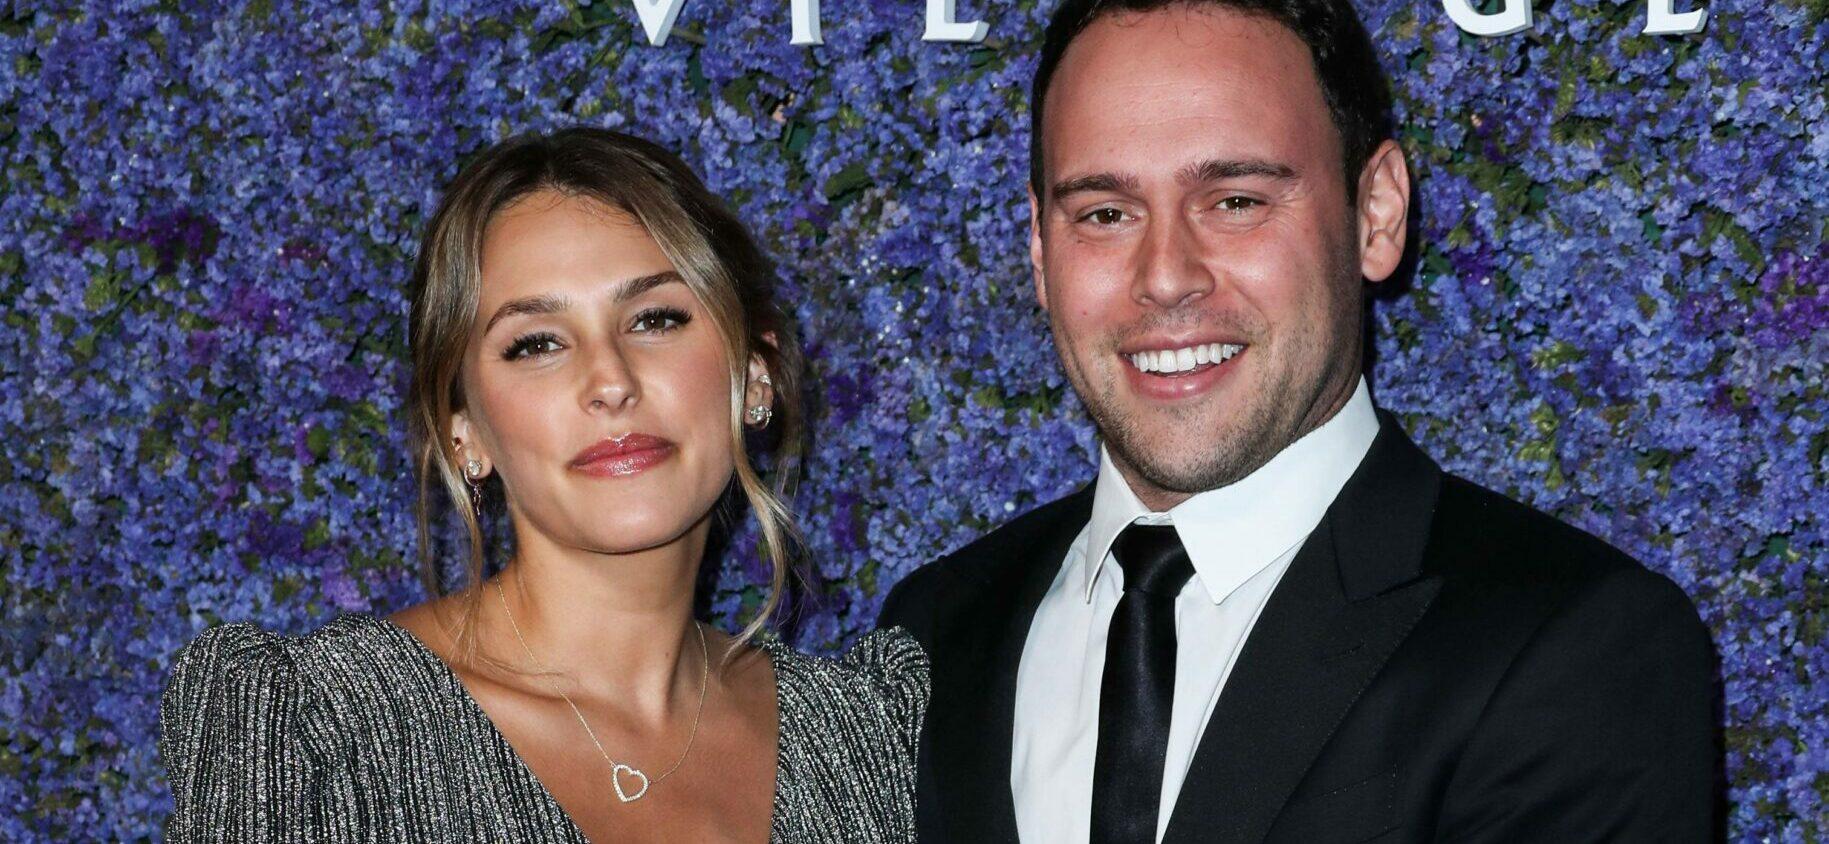 Scooter Braun Used Media Influence To Keep Ex-Wife's Alleged Affair Private